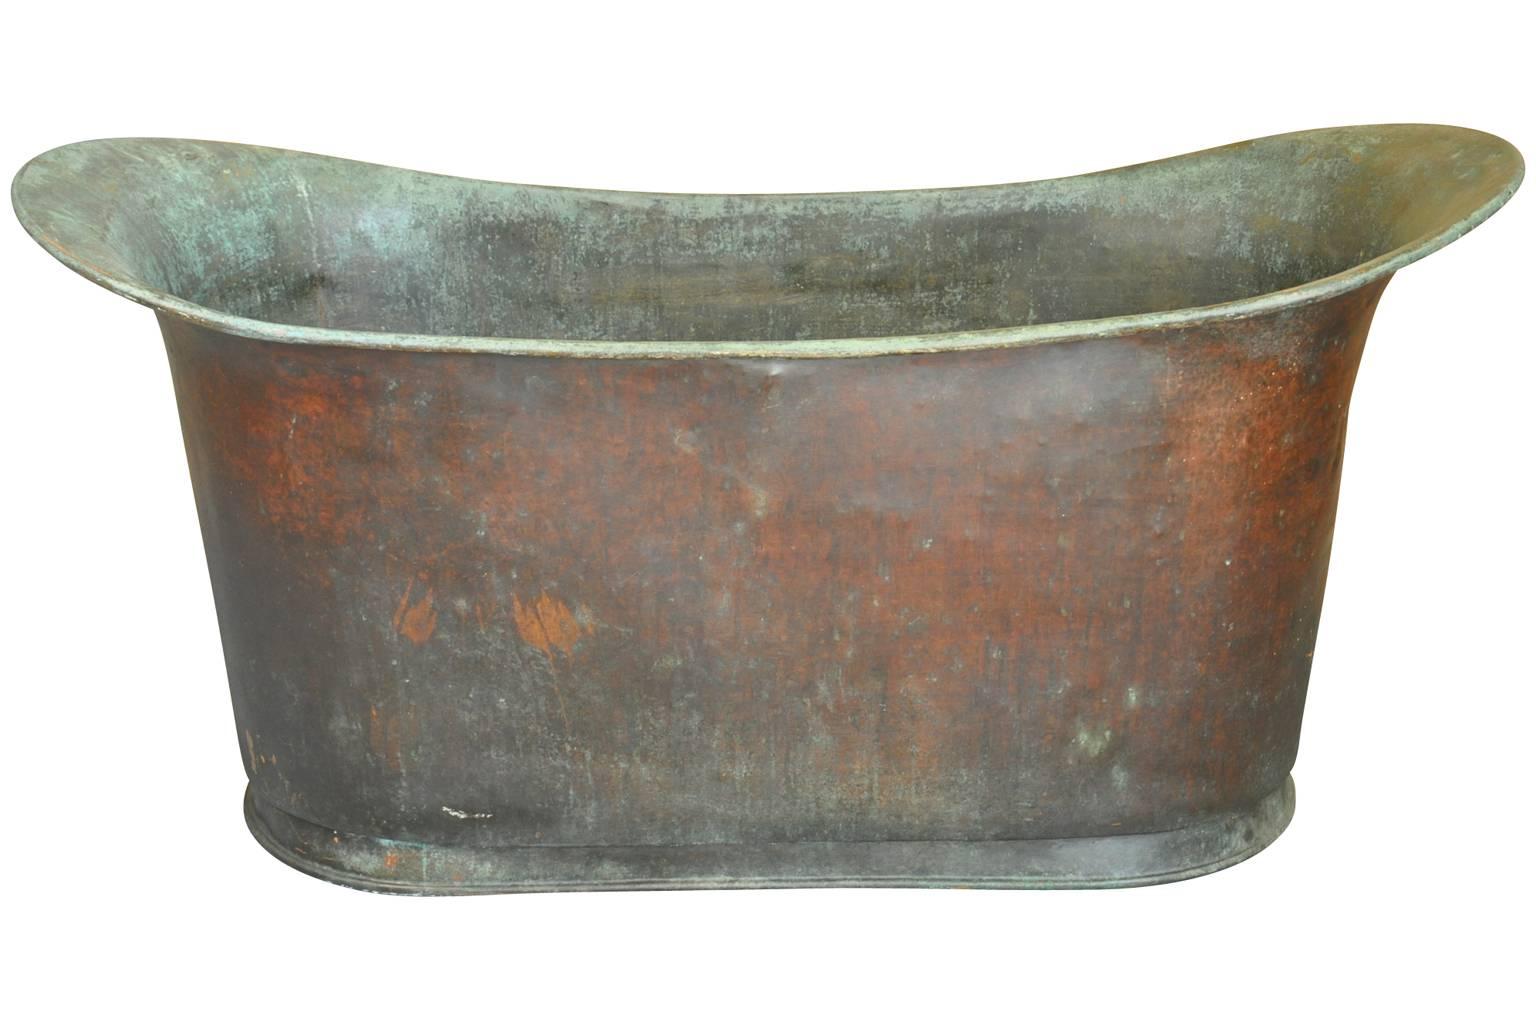 A fabulous mid-19th century slipper shaped copper bath tub from Corsica, France. Beautifully crafted from a heavier gauge copper with a nicely rolled edge finish. Not only wonderful as a bath tub, but can serve as a terrific container to ice down